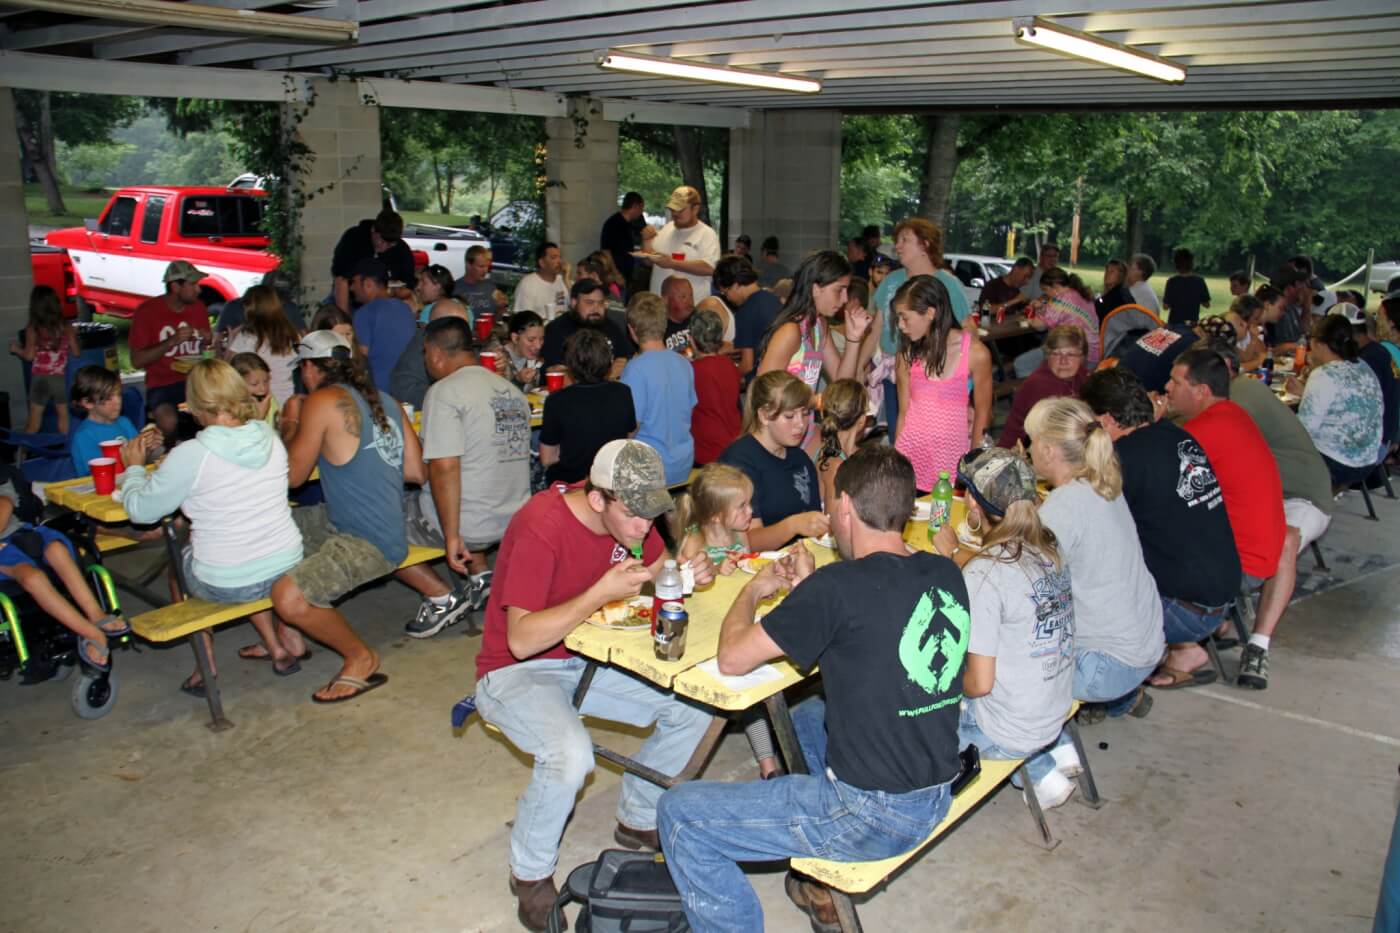 The rain did not dampen the spirits of the 2014 RRE attendees who gathered under the KOA pavilion for the traditional potluck dinner.